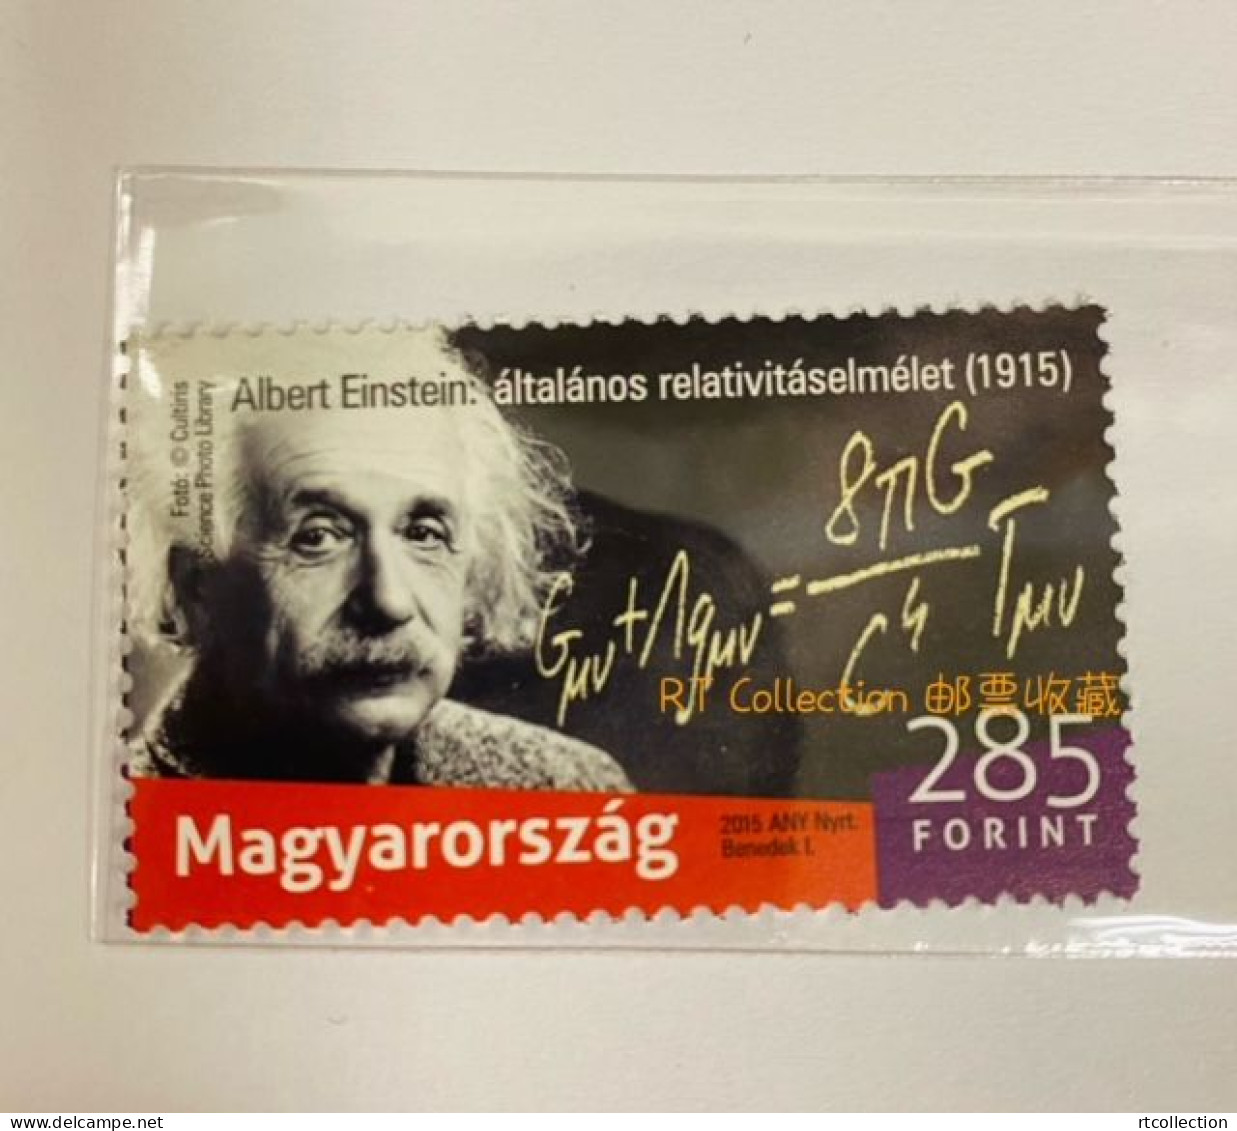 Hungary 2015 100th Anniv Albert Einstein General Theory Of Relativity Nobel Physics Physicist Sciences People Stamp MNH - Physique